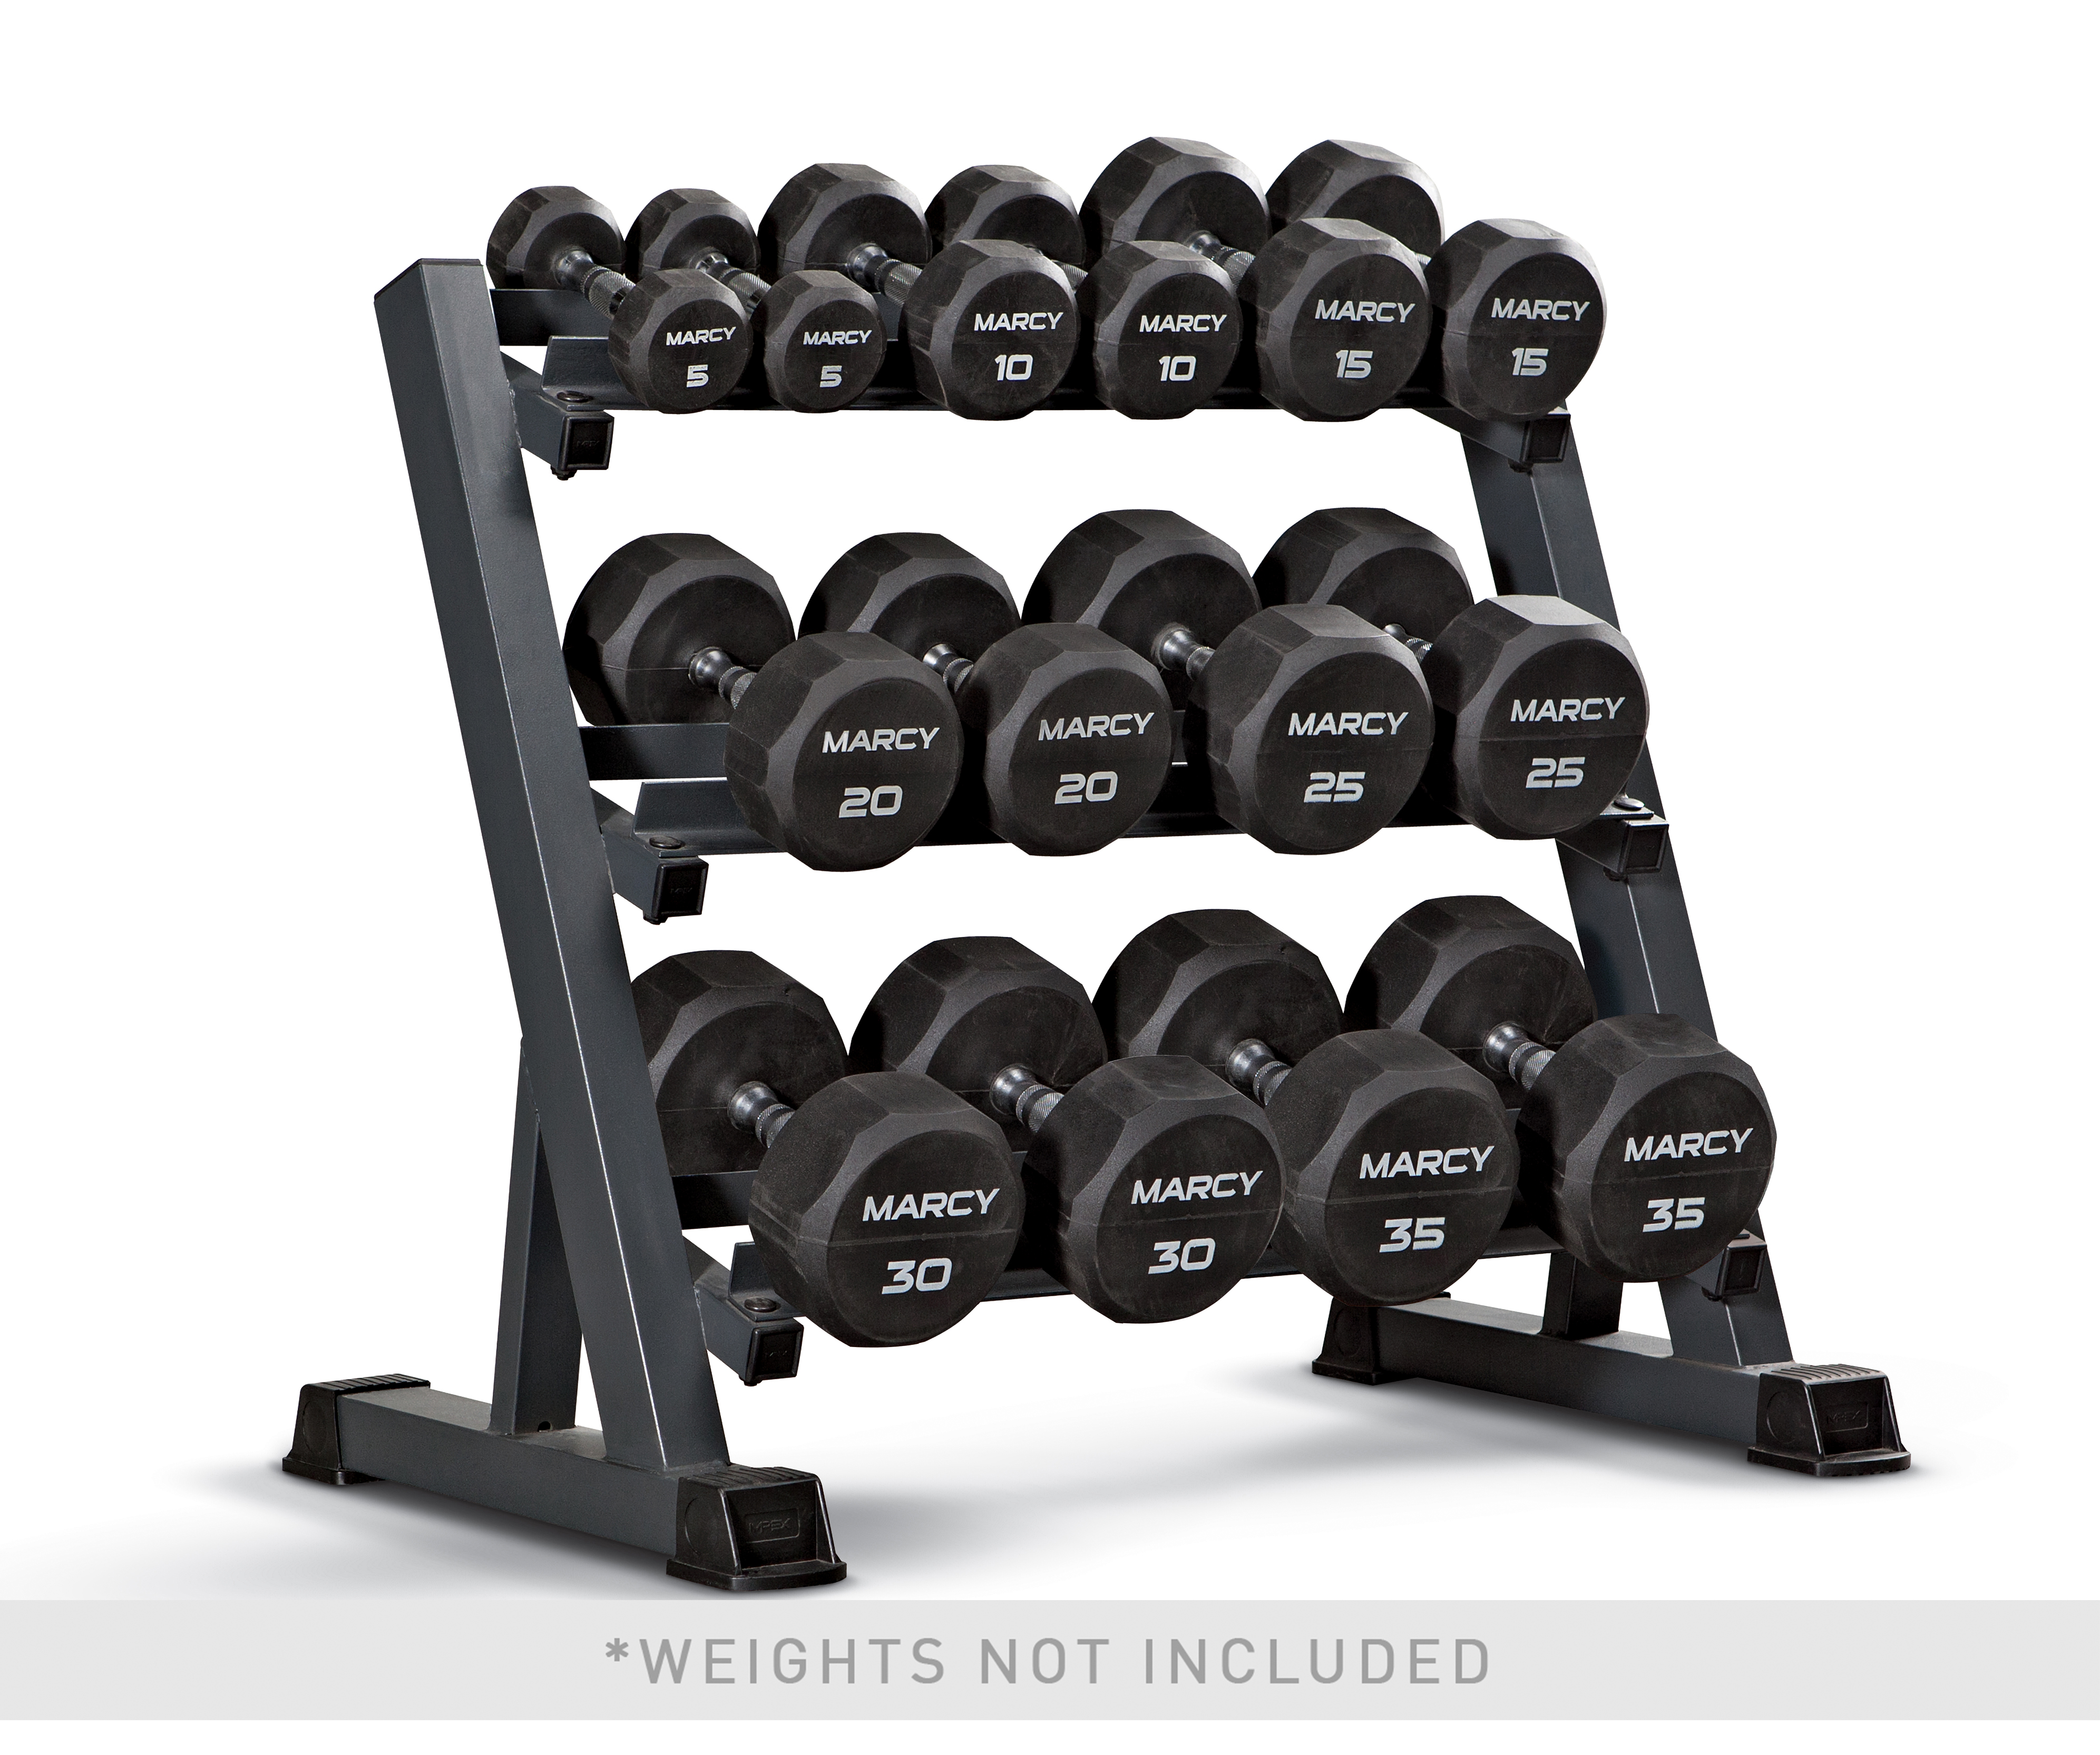 Marcy Apex 3-Tier Dumbbell Rack: DBR-86 - image 3 of 4